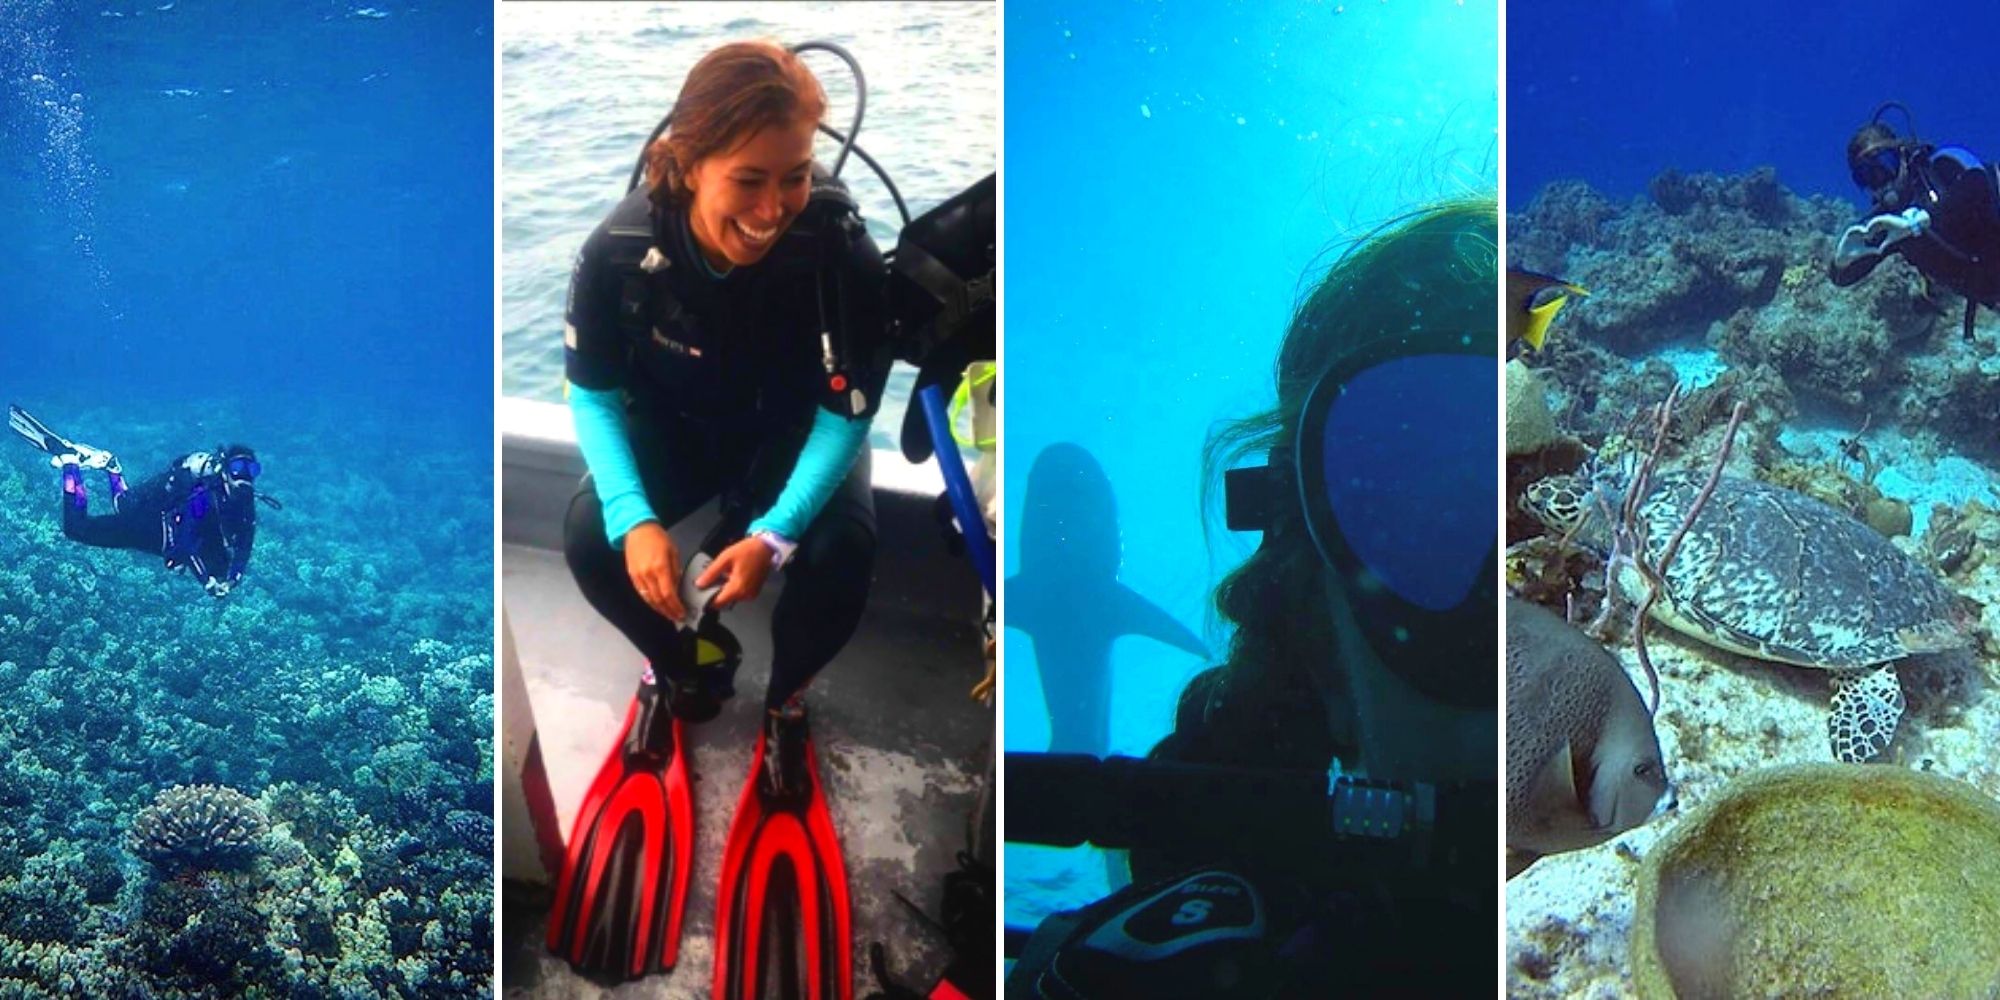 Jenna LaBranche, a PADI Travel Scuba Travel Expert, and someone who can explain 'why book with PADI Travel'